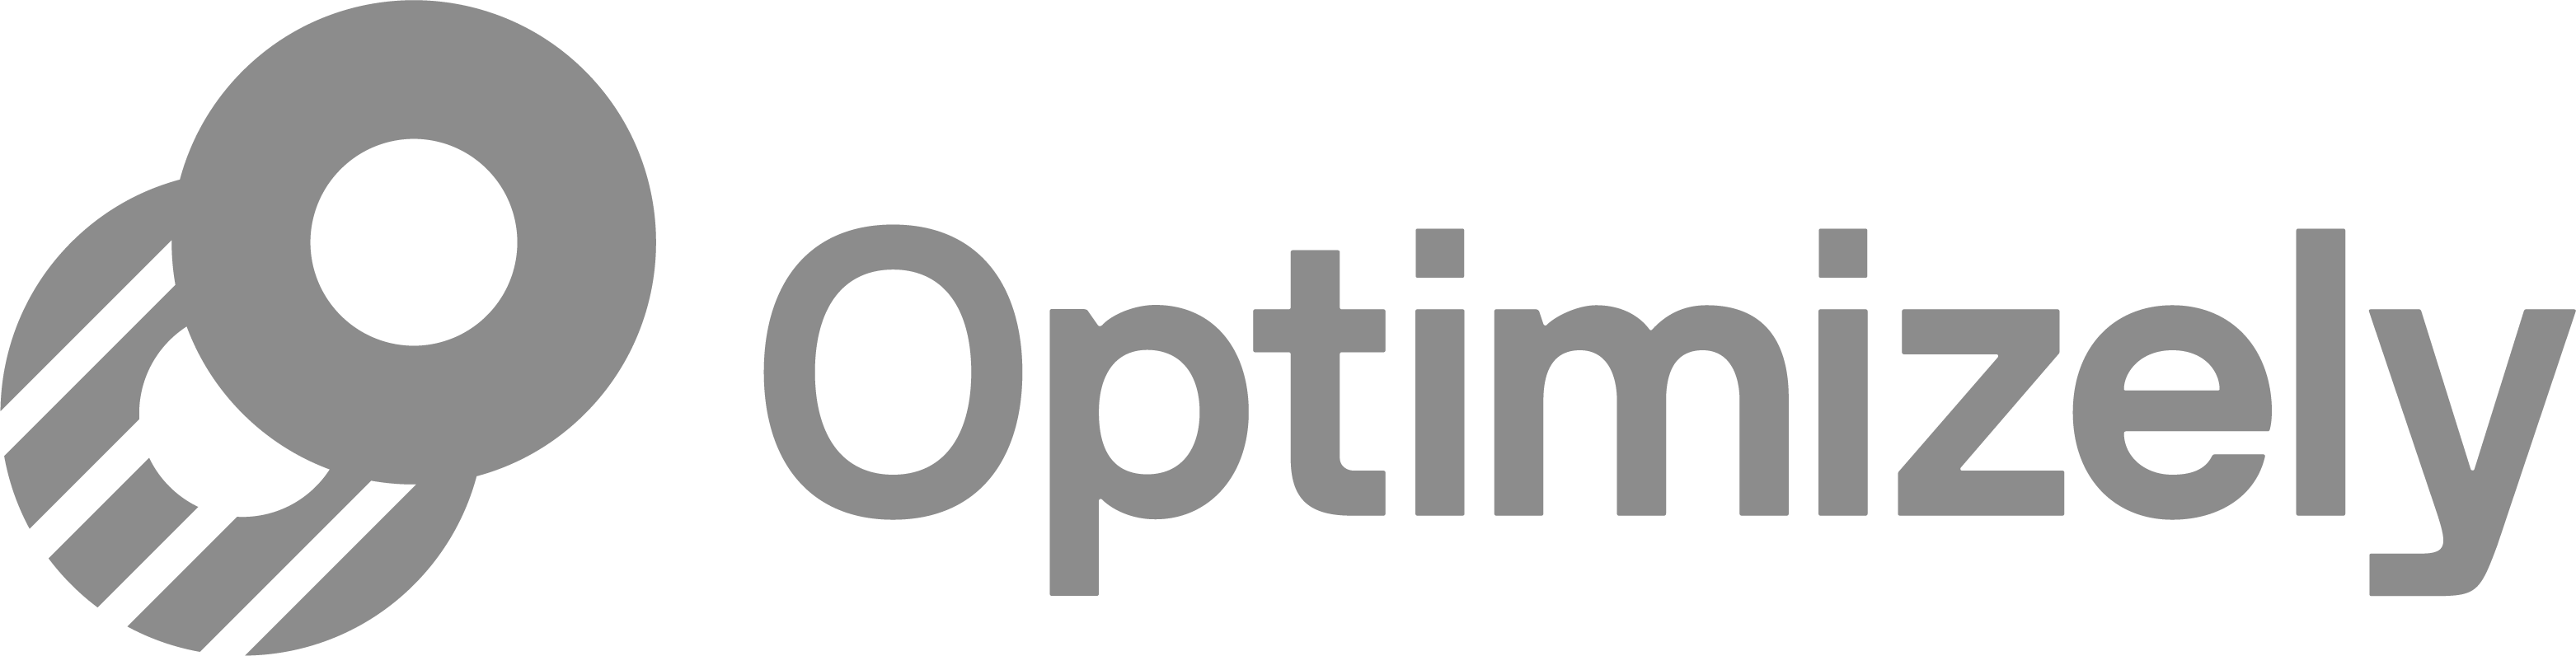 optimizely_logo_grayscale.png